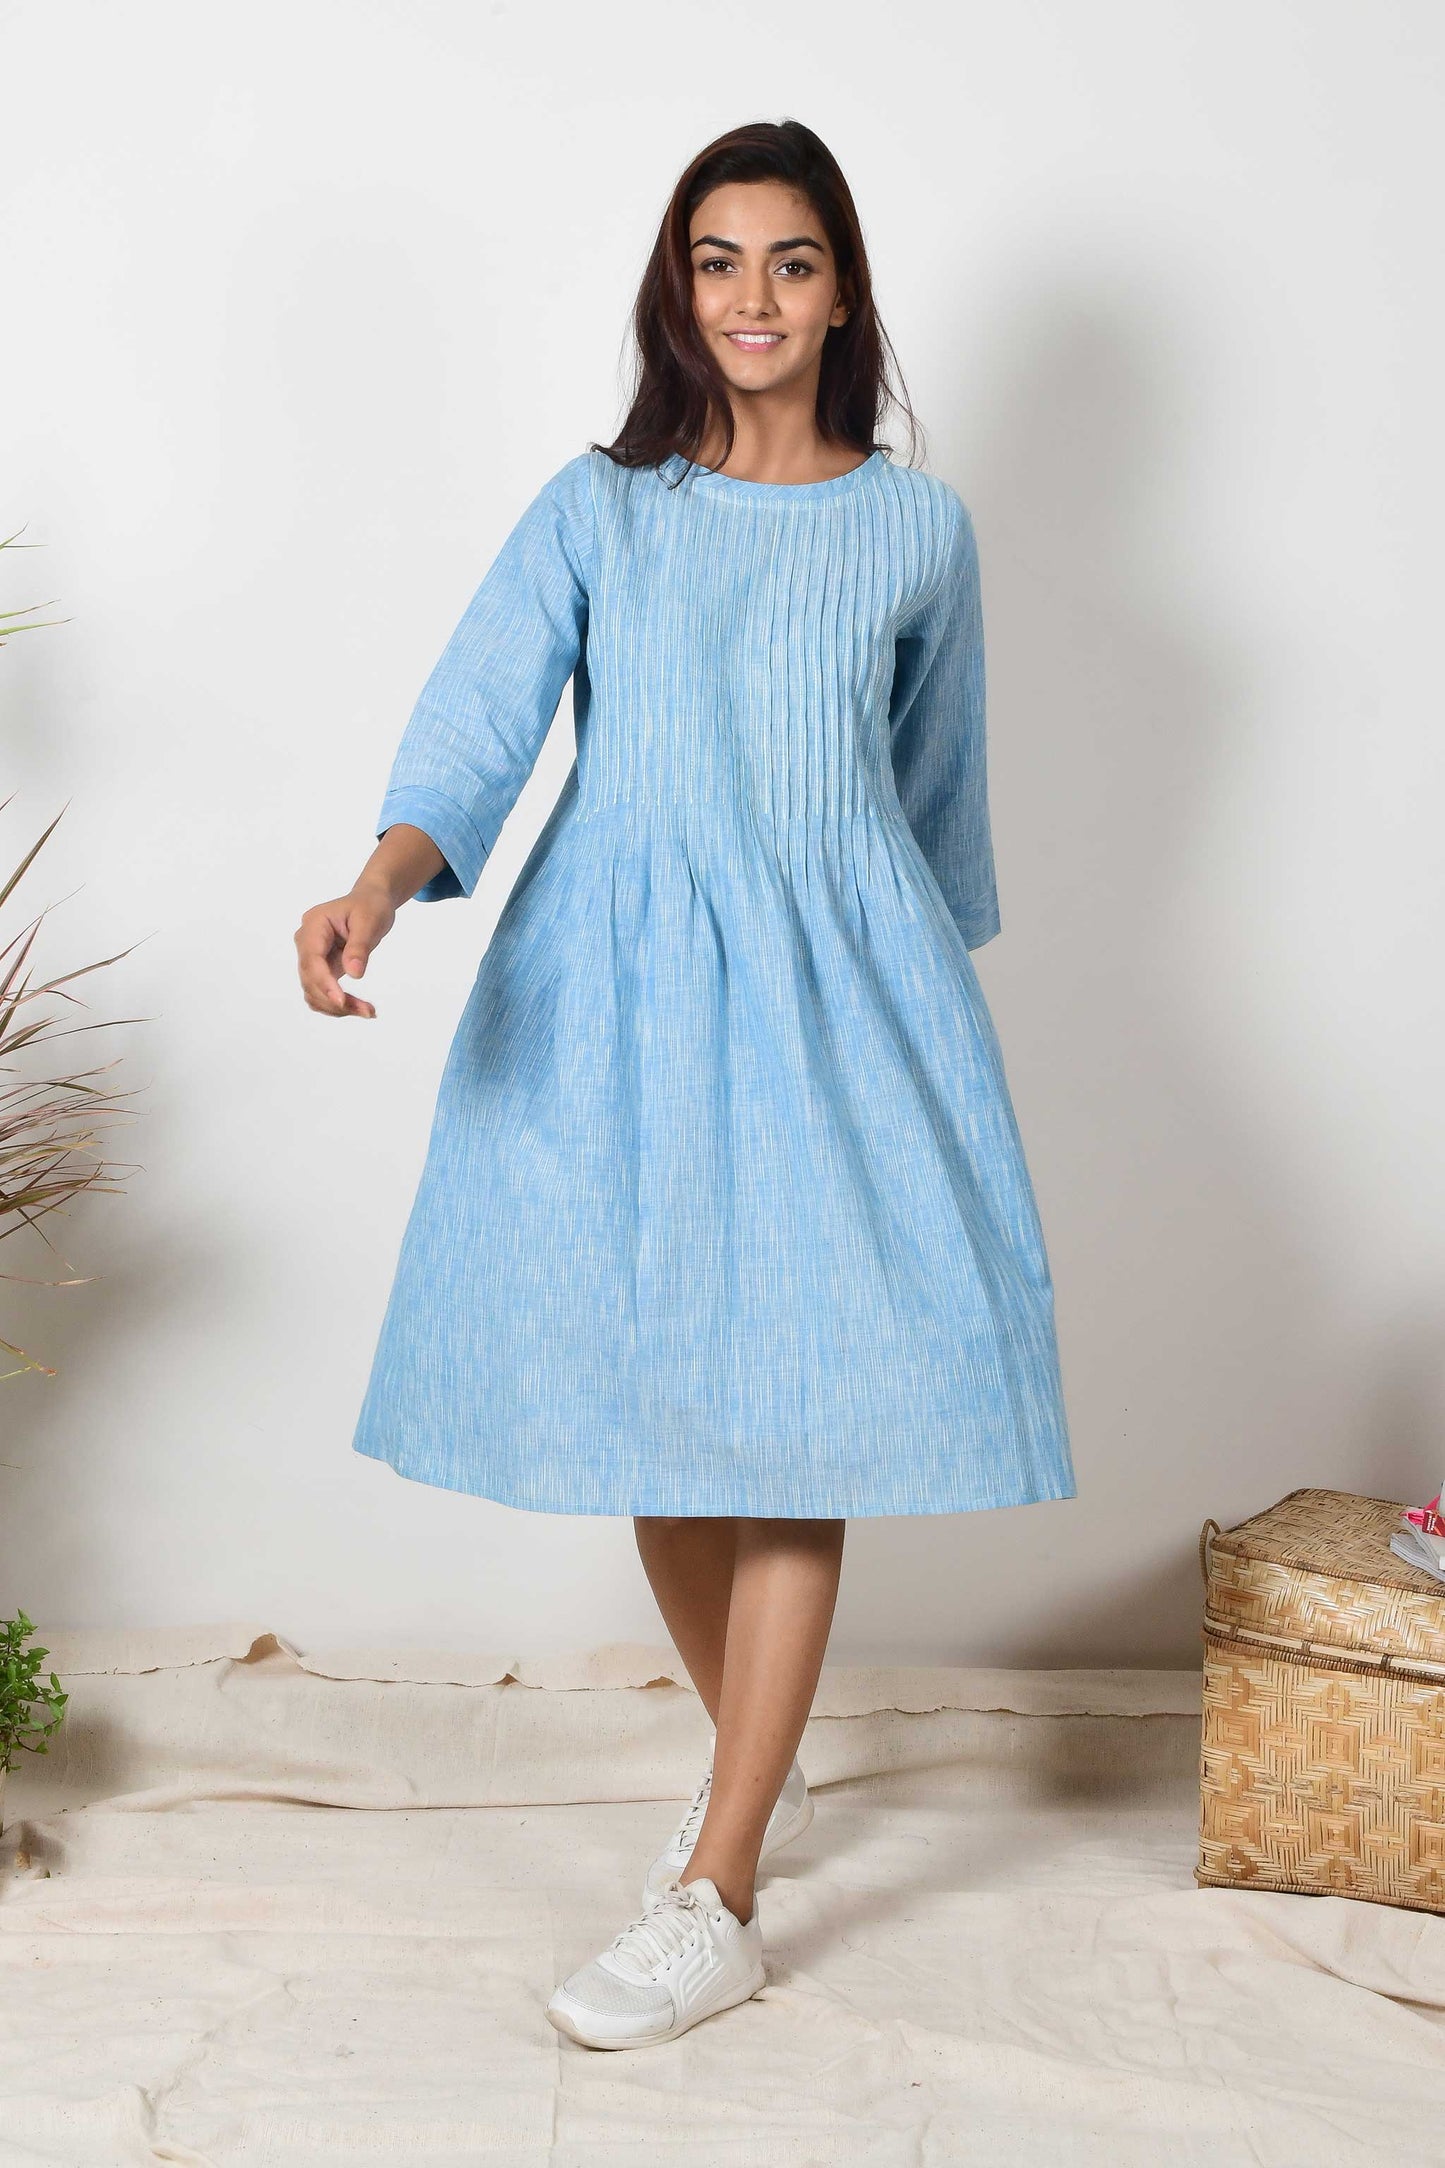 Indian girl smiling and wearing sky blue cotton pleated dress with a pair of white sneakers